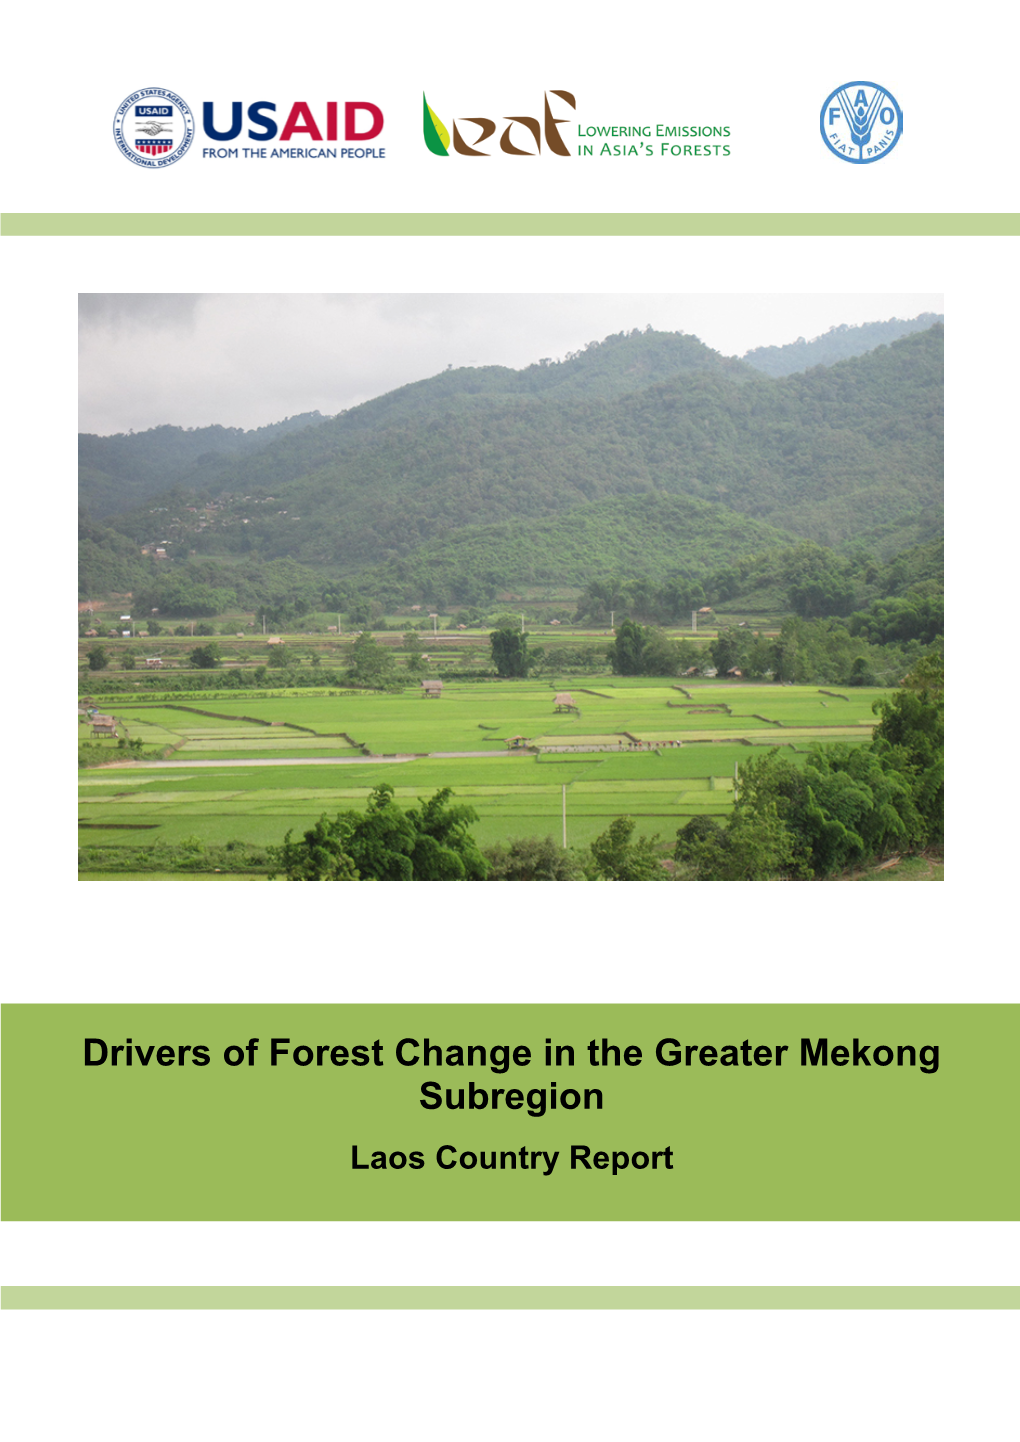 Lao PDR National Report